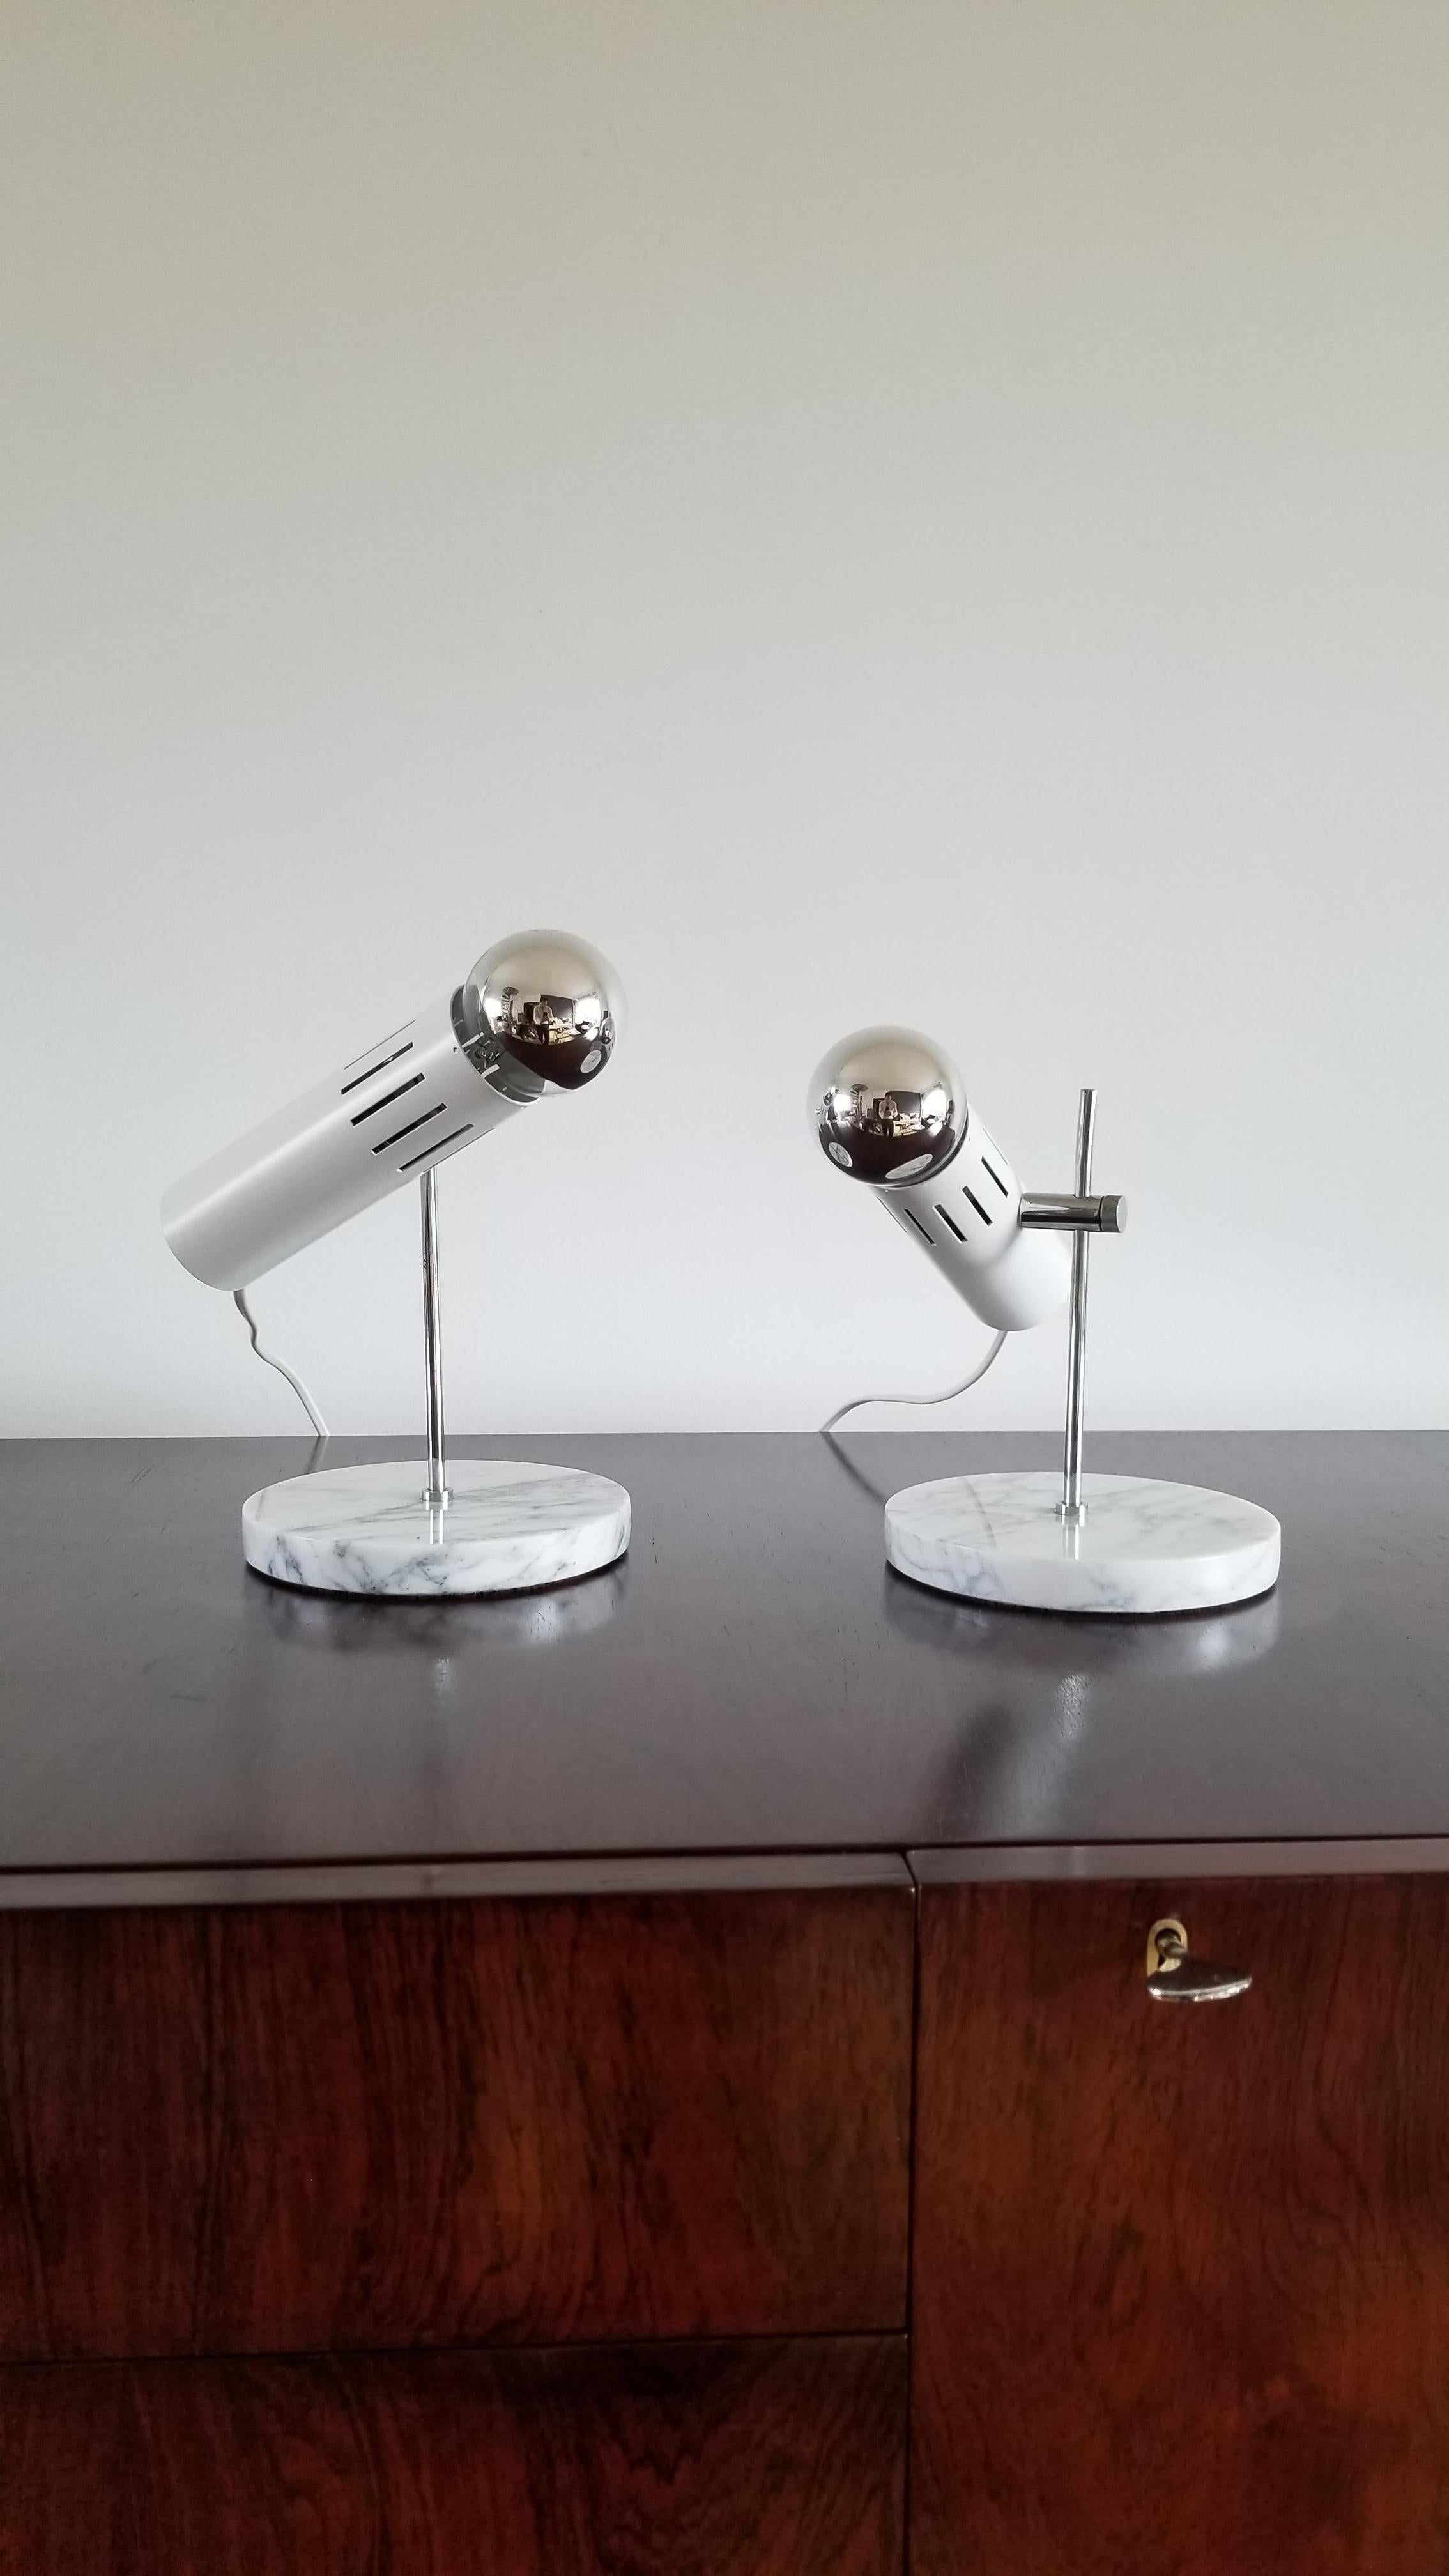 Marble, chrome, and lacquered steel table lamps. Editions Disderot, France. Good vintage condition.

Can be adjusted in height and can rotate around the pole.

European socket and wiring. Price includes rewiring for the US.